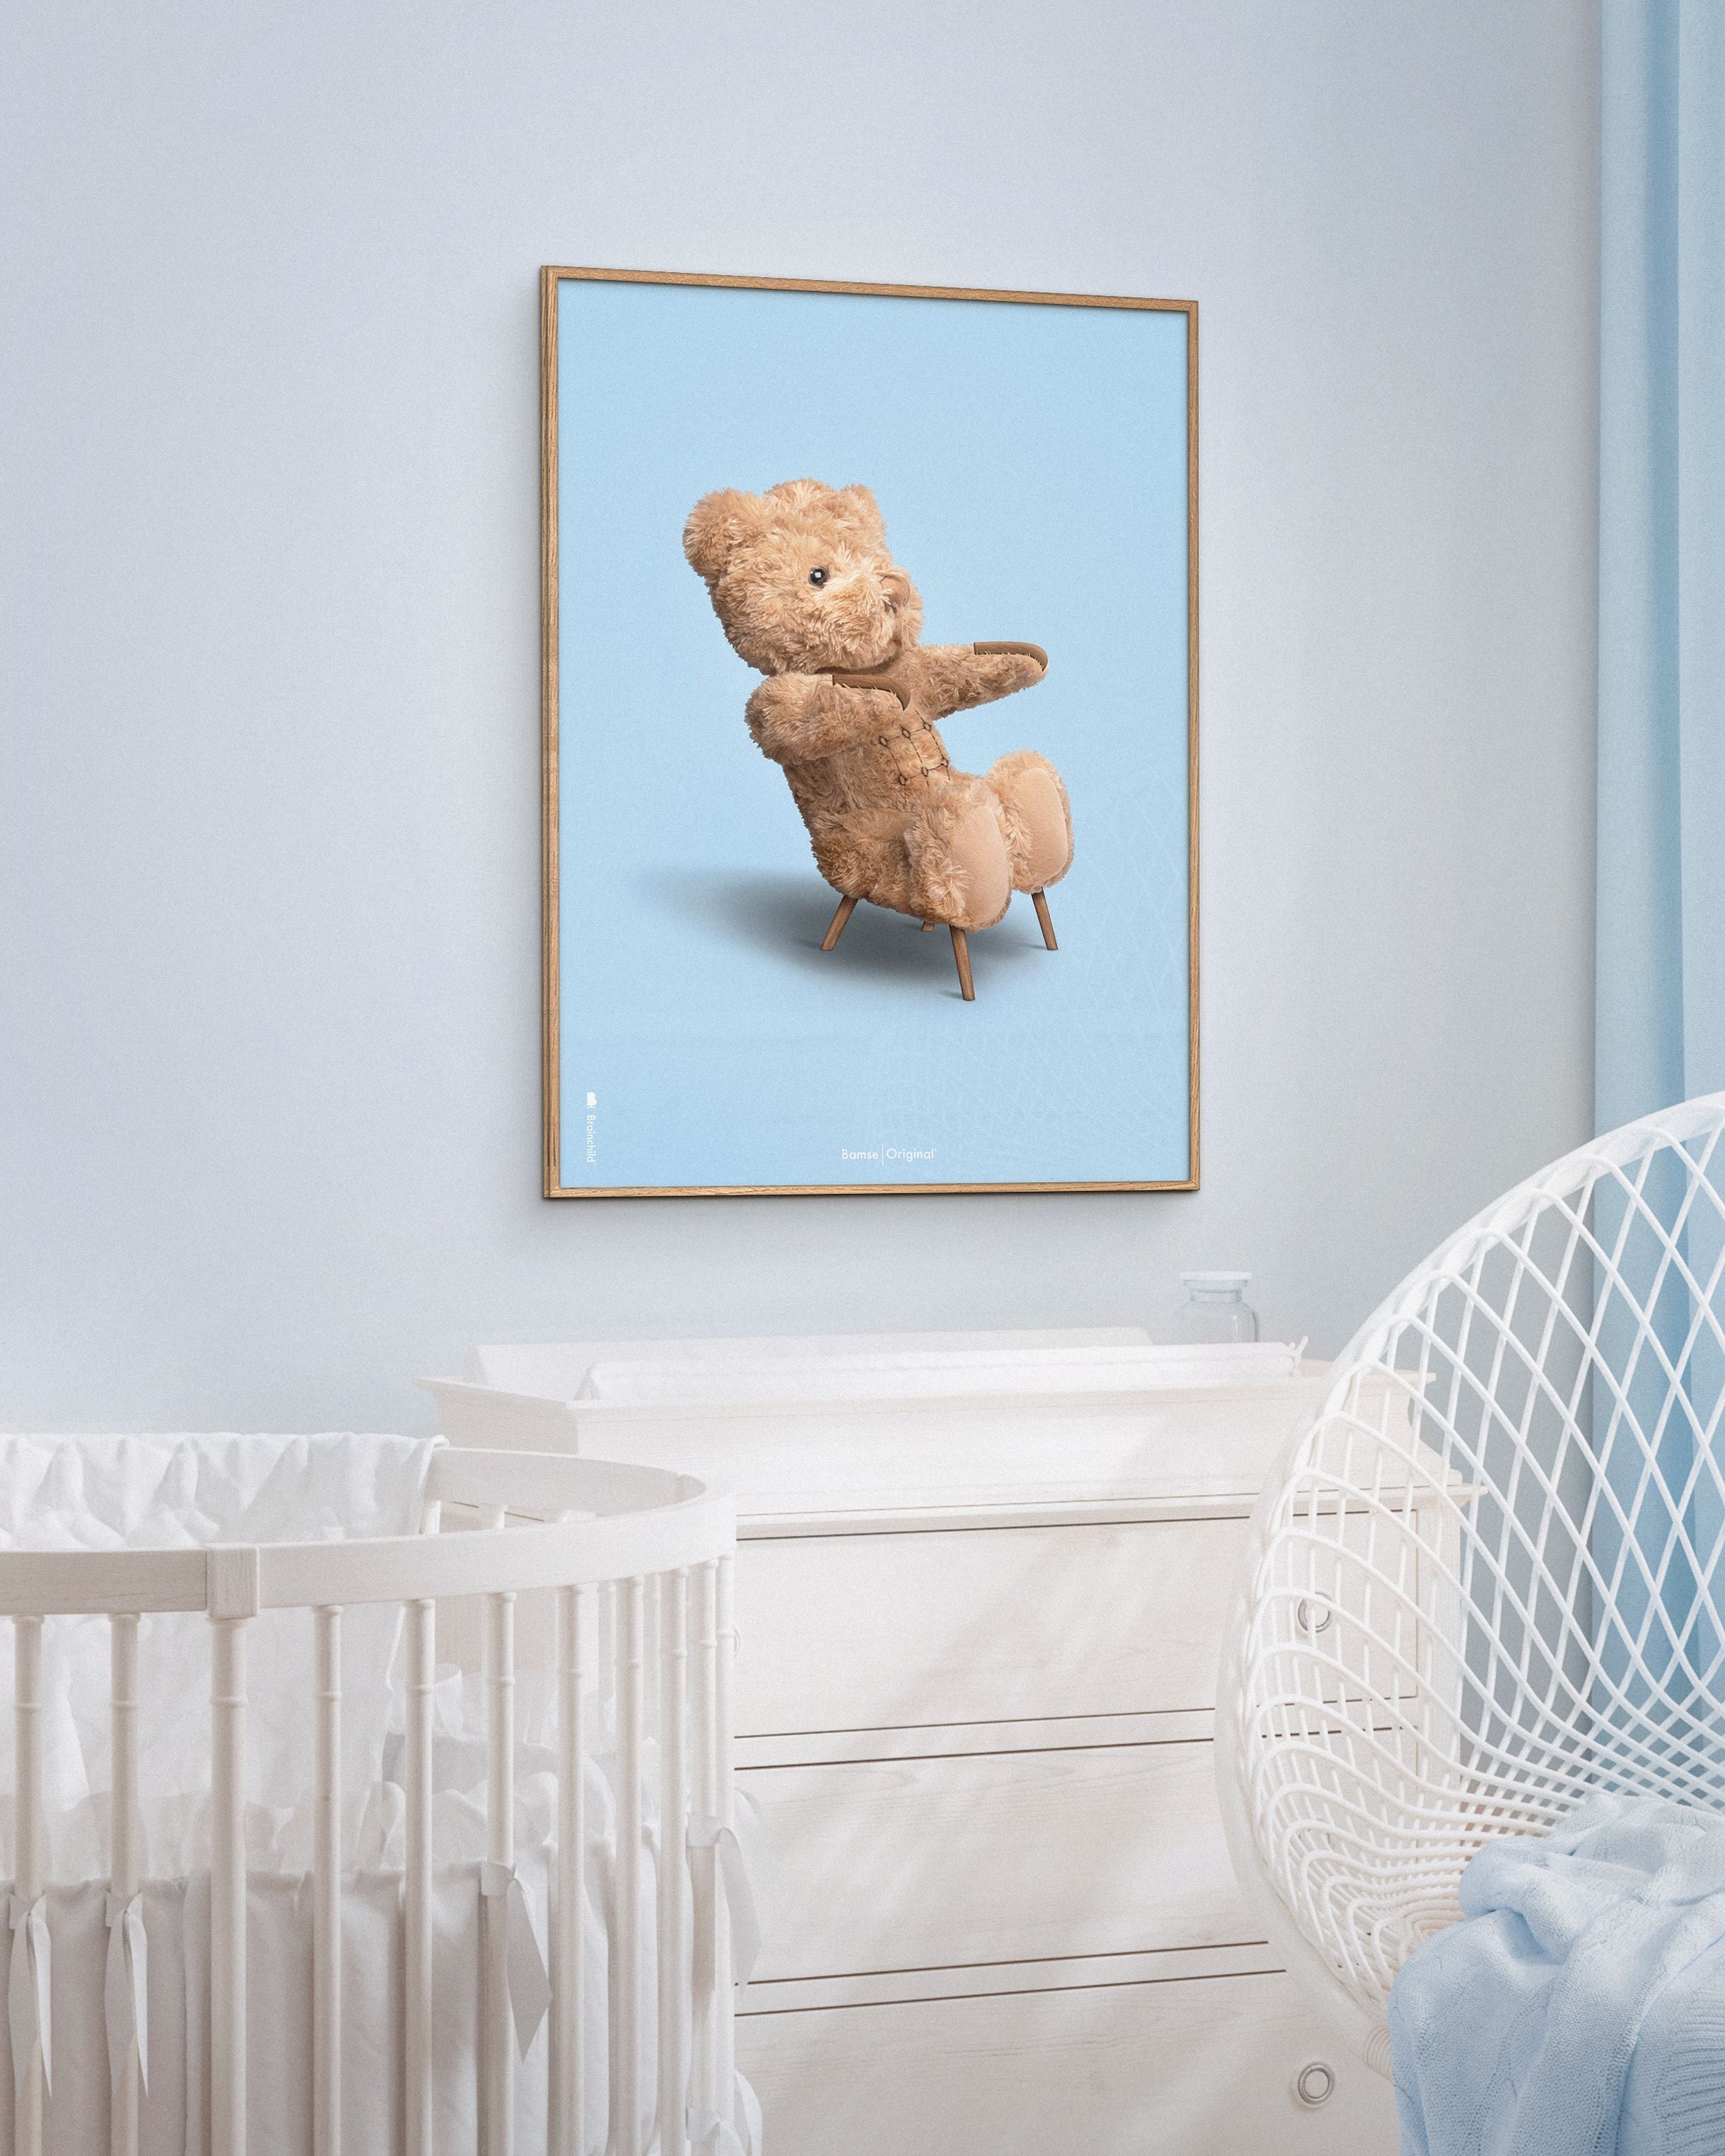 Brainchild Teddy Bear Classic Poster Without Frame A5, Light Blue Background